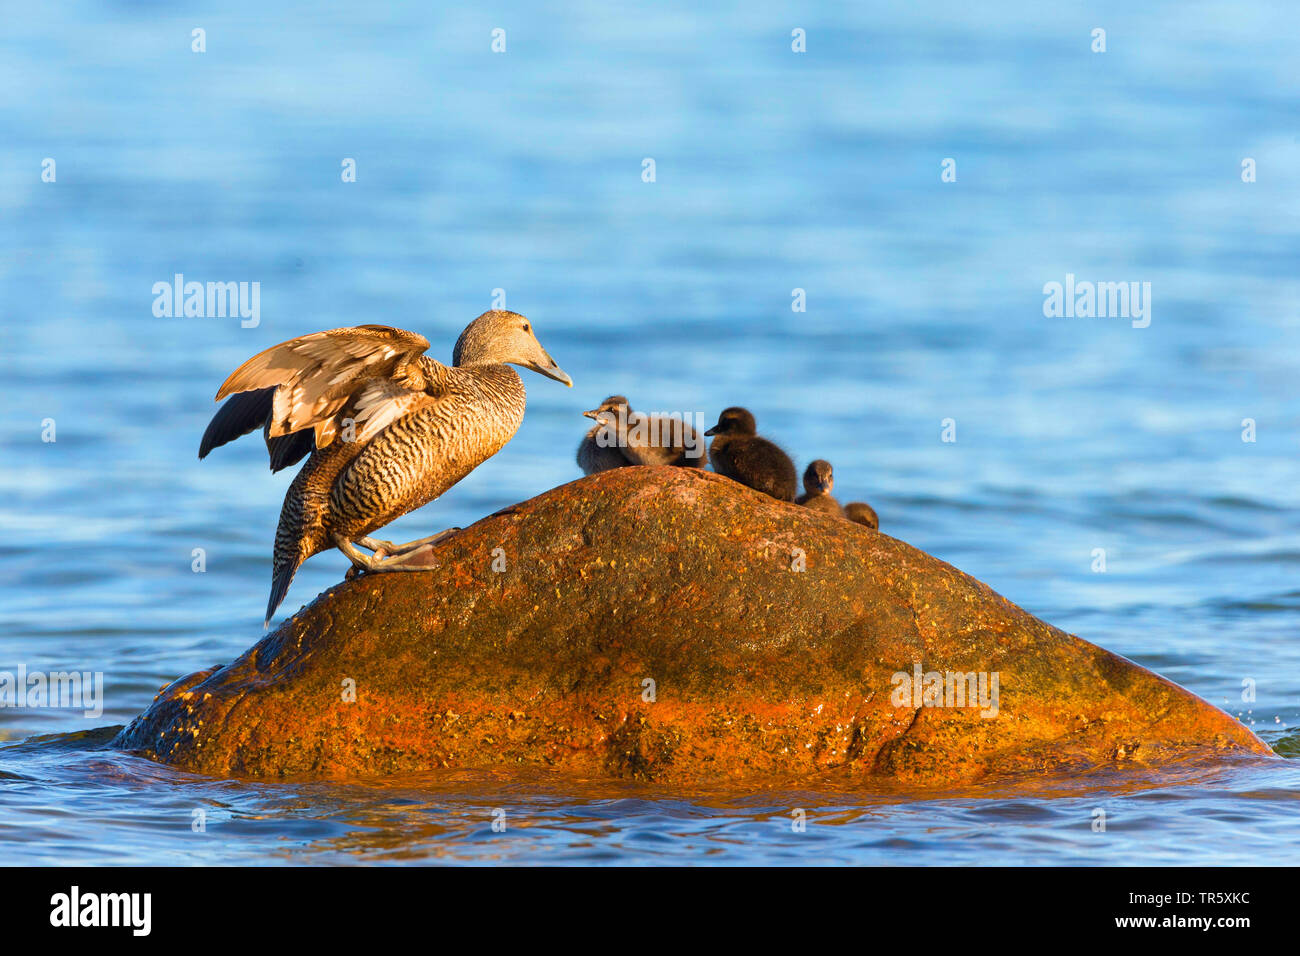 Common eider (Somateria mollissima), female resting with goslings on a stone in the water, Sweden Stock Photo